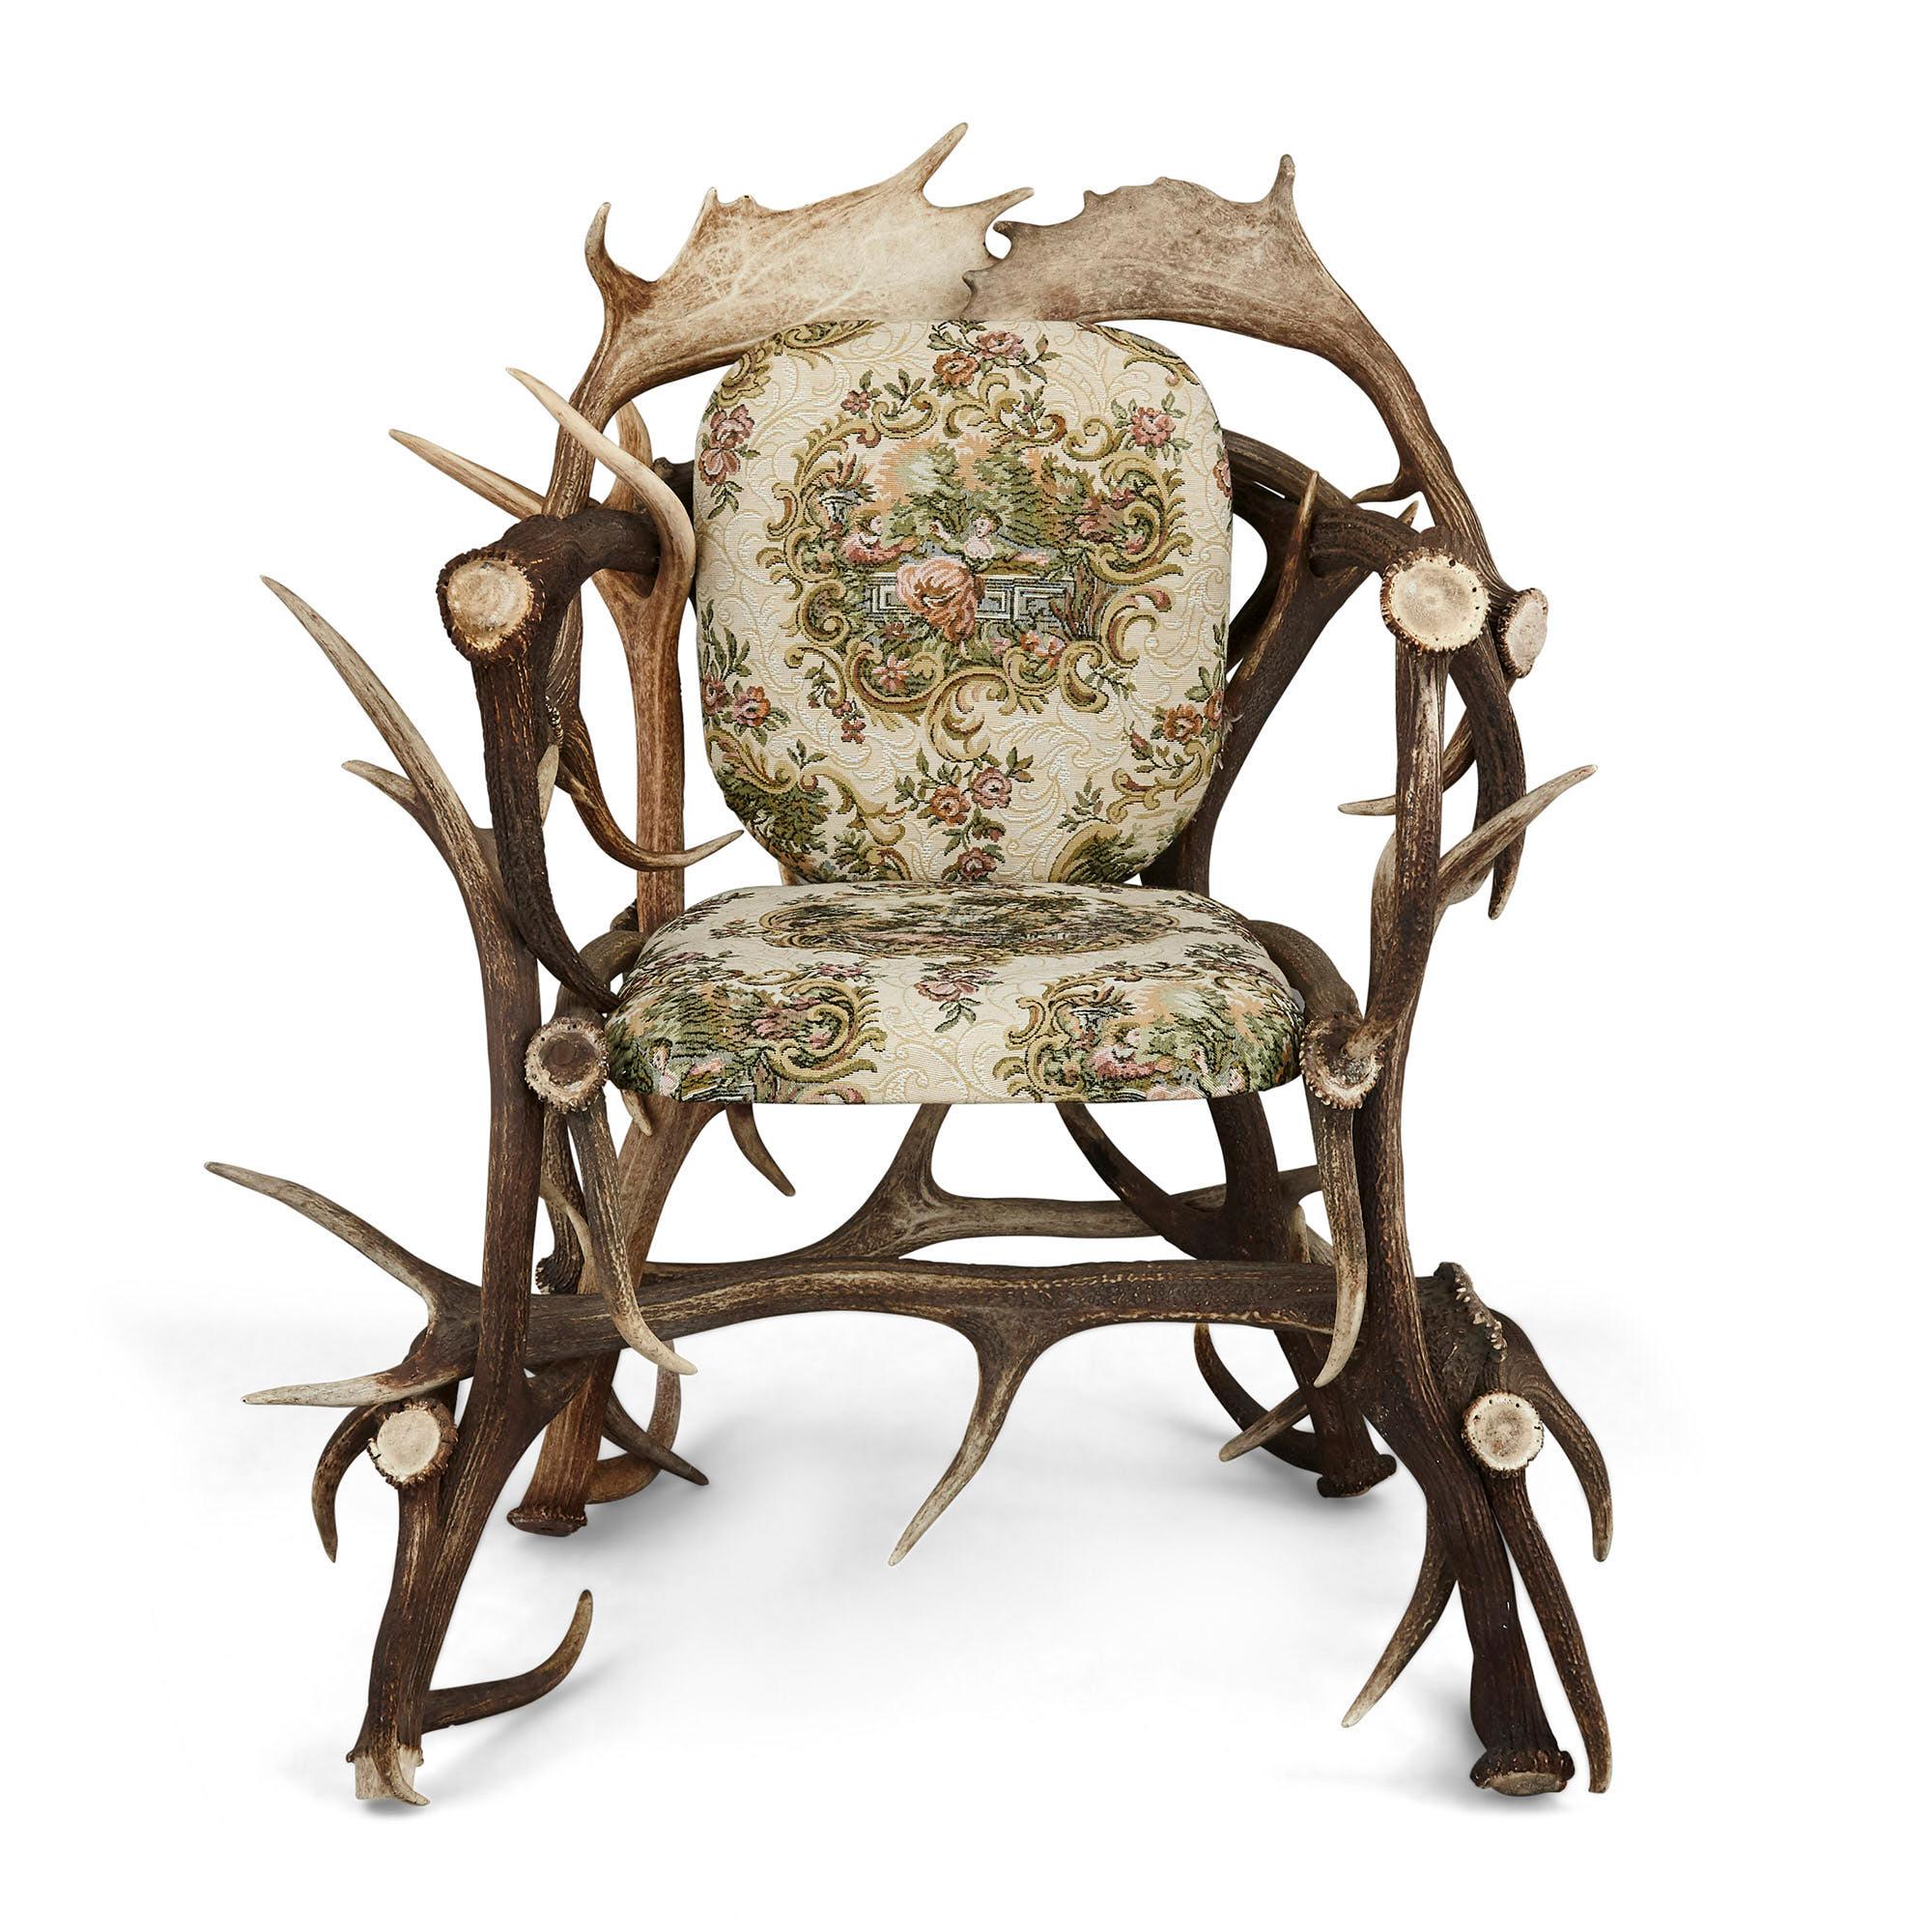 Pair of antique German Antler chairs with rococo style upholstery.
German, early 20th century
Dimensions: Height 108cm, width 212cm, depth 80cm

These unusual chairs, an example of 'antler-seat furniture', were likely crafted in Germany in the